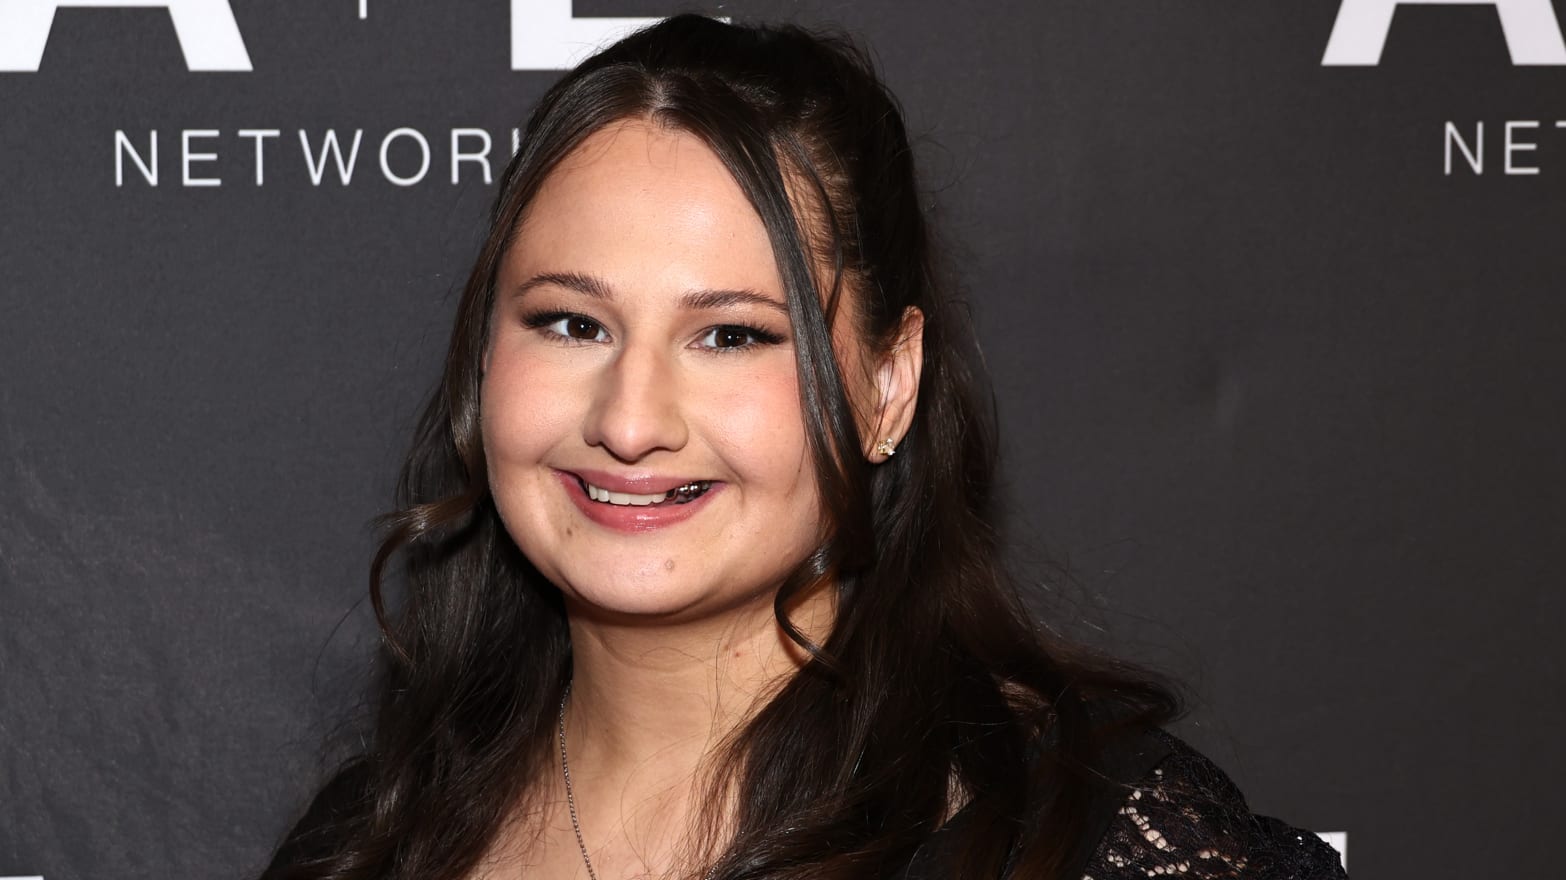 Gypsy Rose Blanchard attends "The Prison Confessions Of Gypsy Rose Blanchard" Red Carpet Event